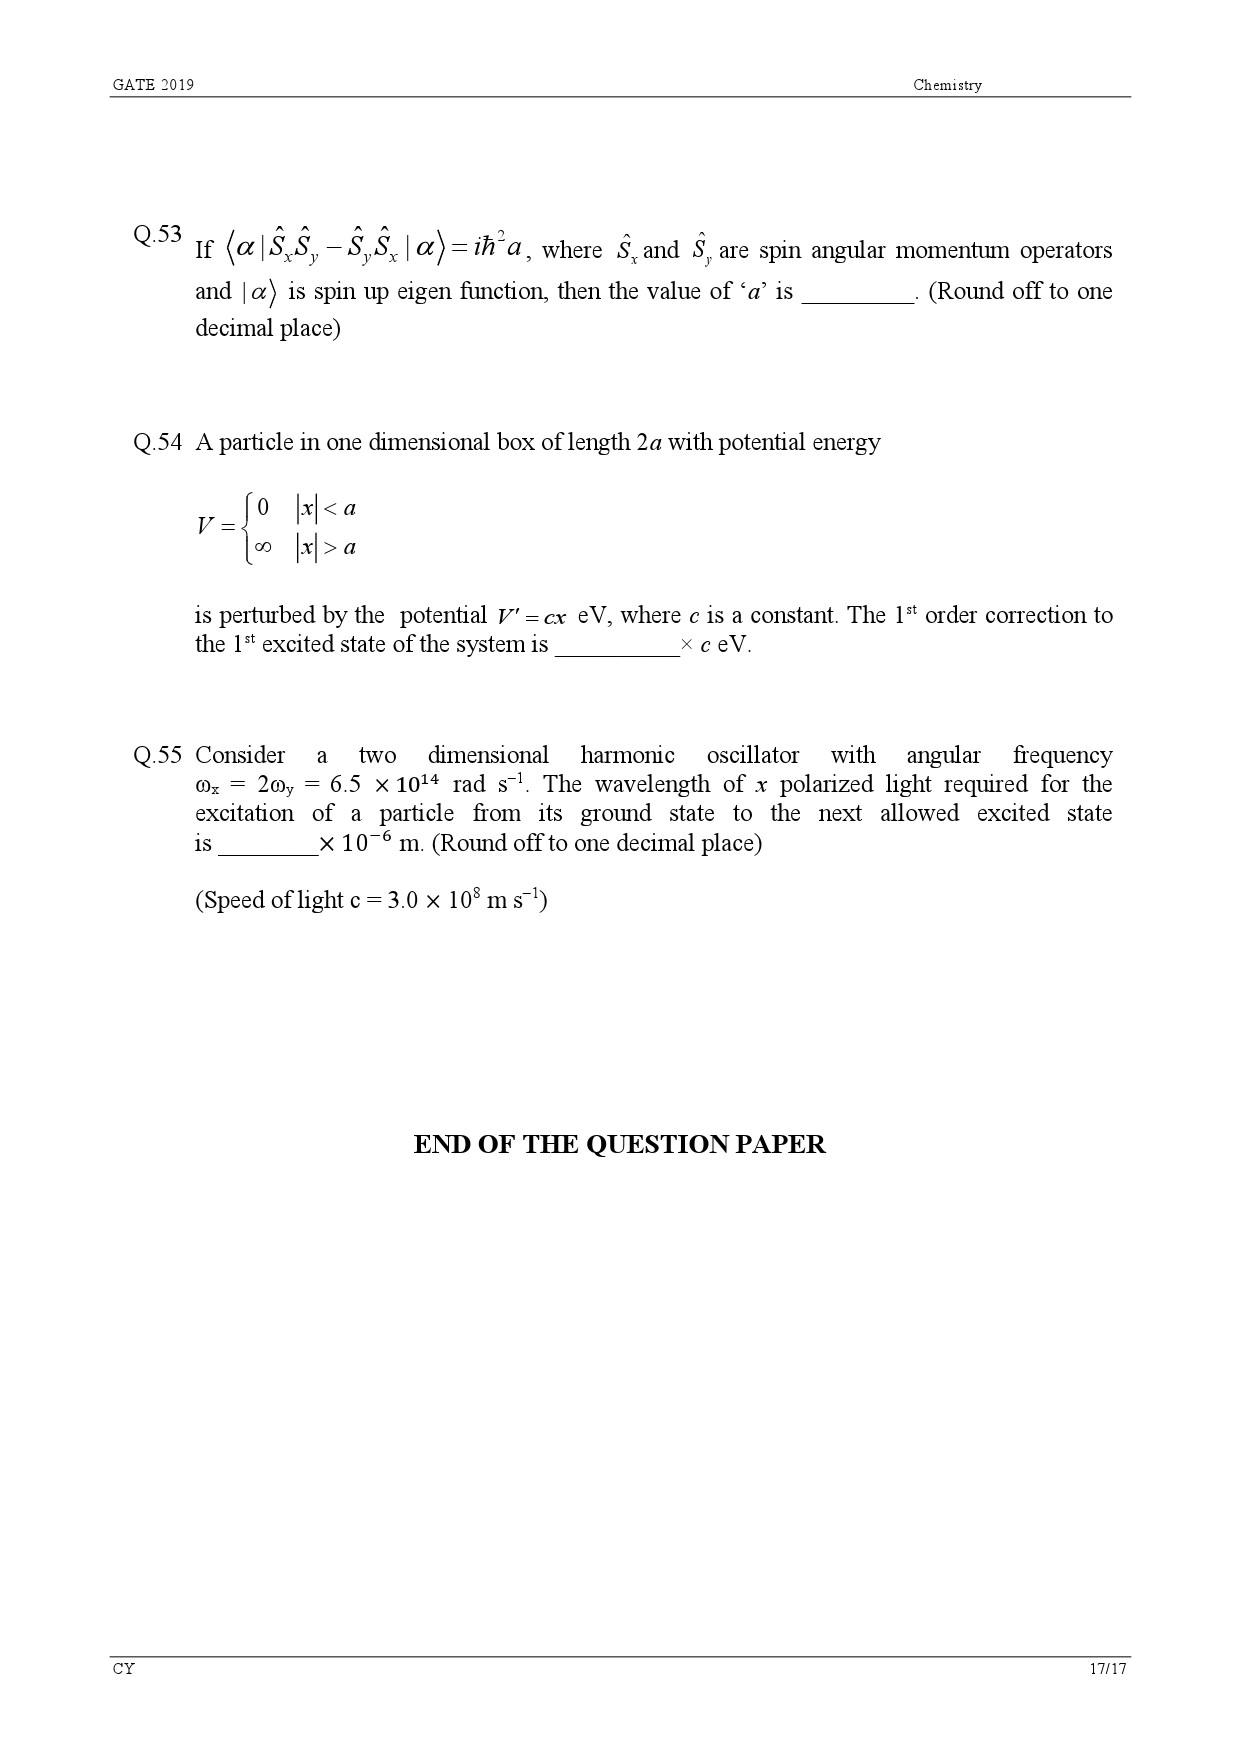 GATE Exam Question Paper 2019 Chemistry 20